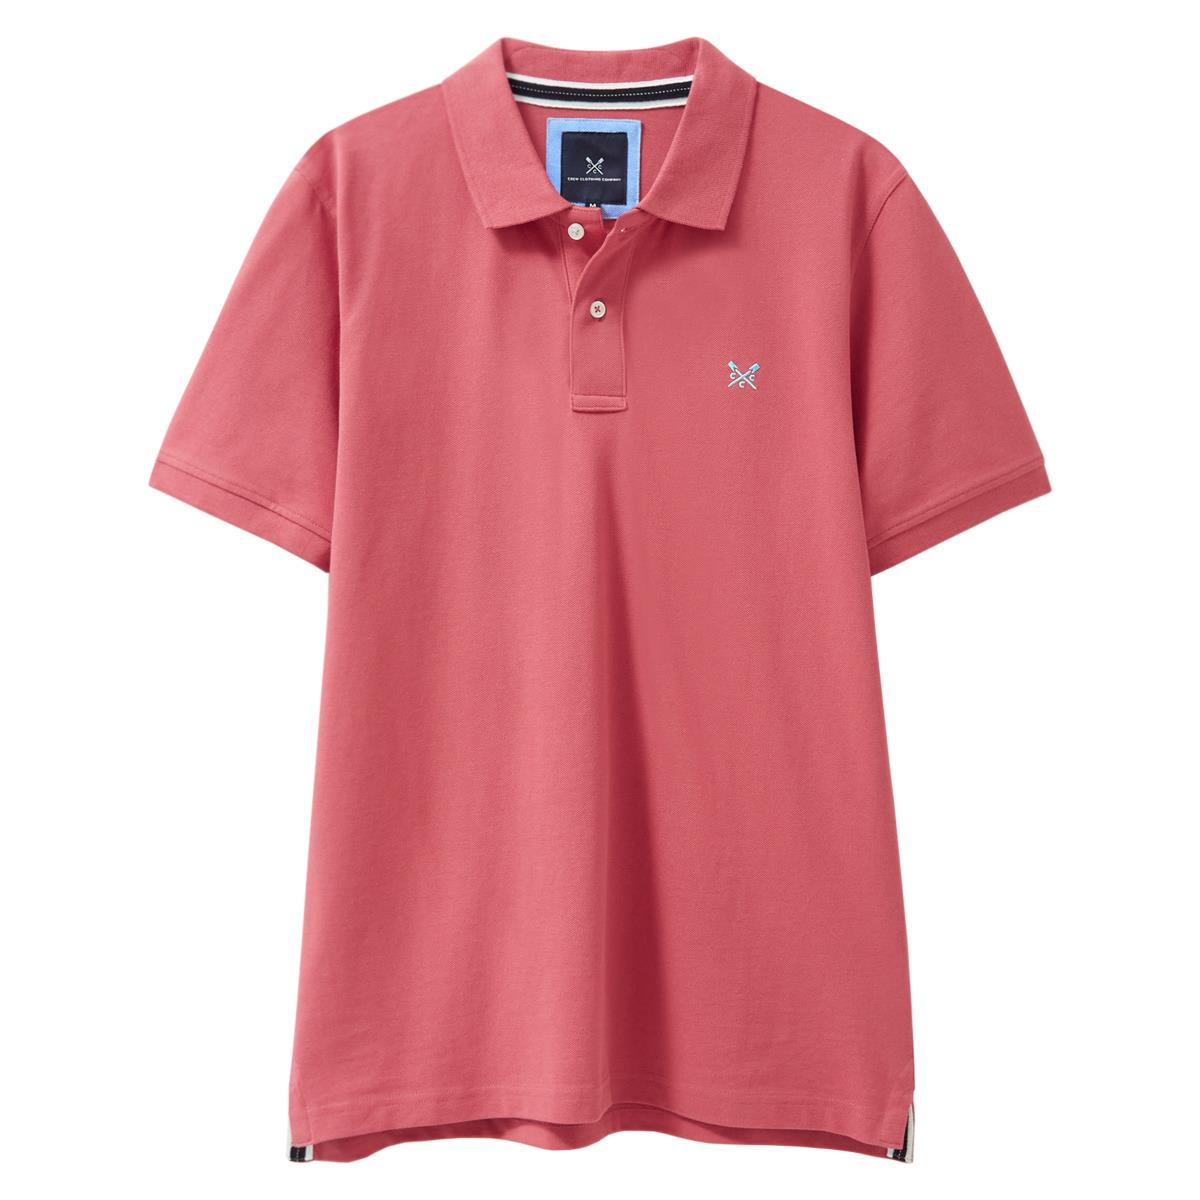 Is the Crew Clothing Mens Classic Pique Polo Shirt pre-washed?